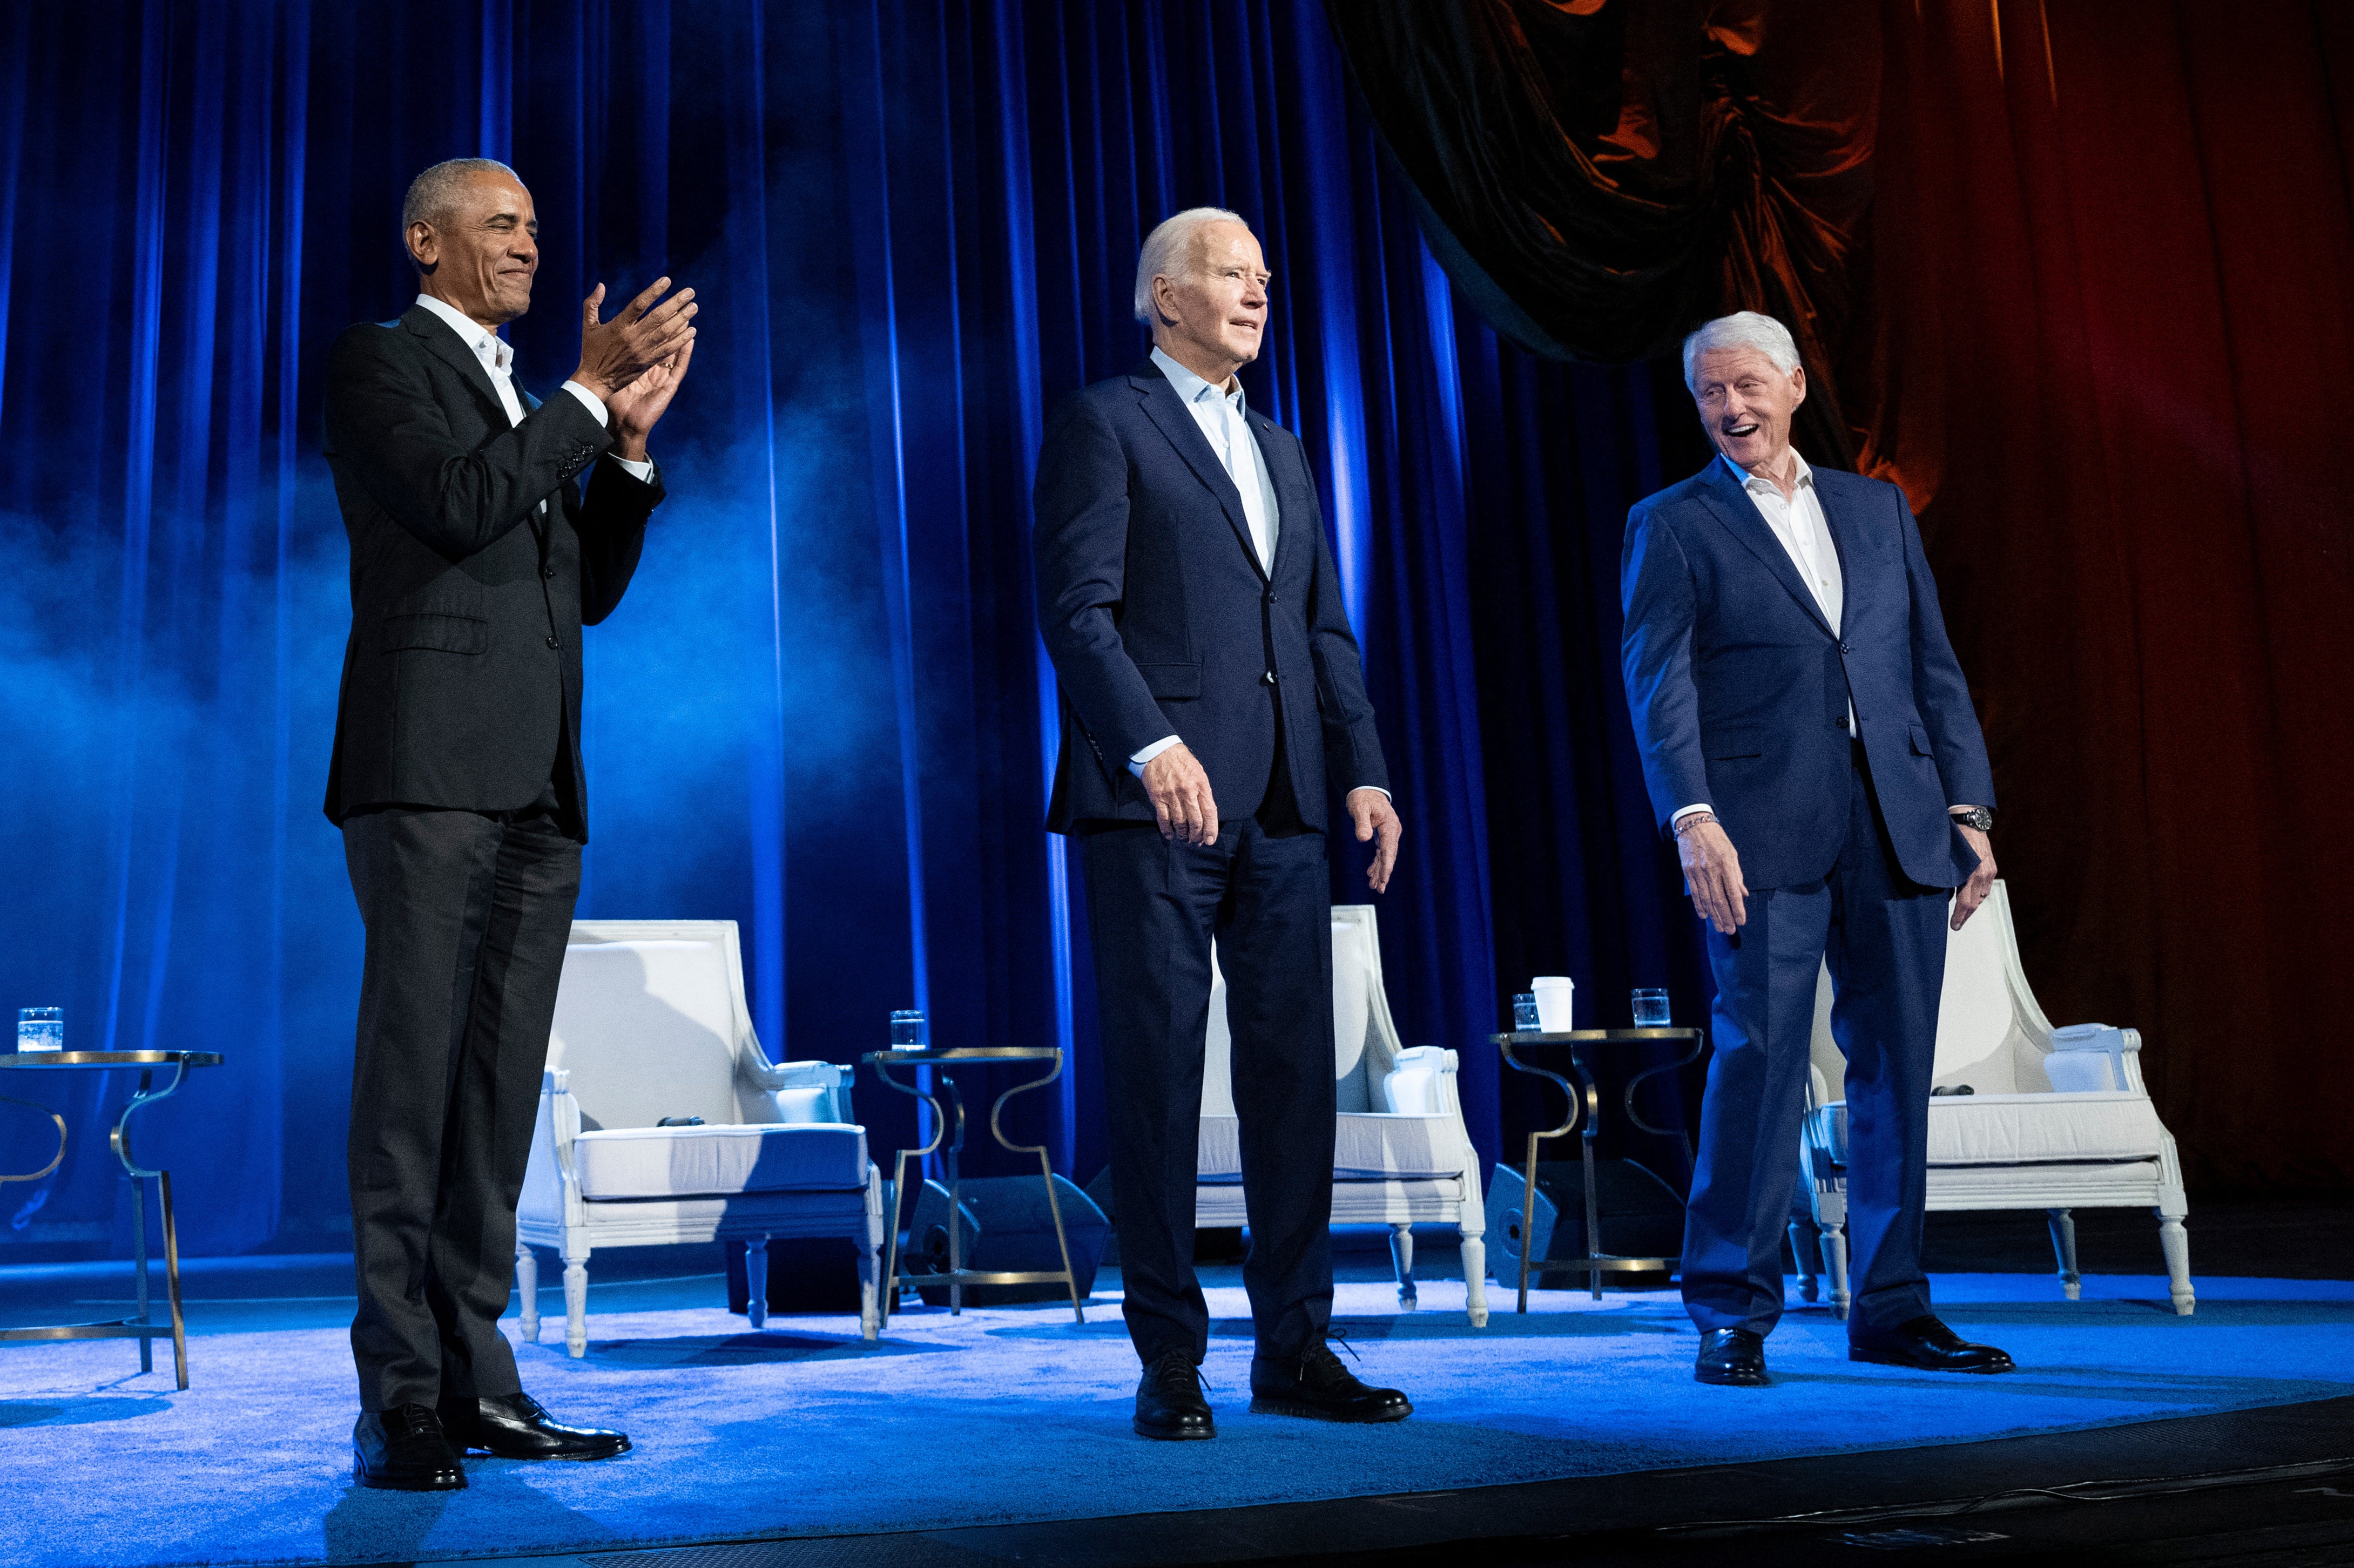 Former presidents Barack Obama and Bill Clinton and current President Joe Biden helped raise $26m during a fundraiser in New York on 28 March, adding to Mr Biden’s fundraising lead